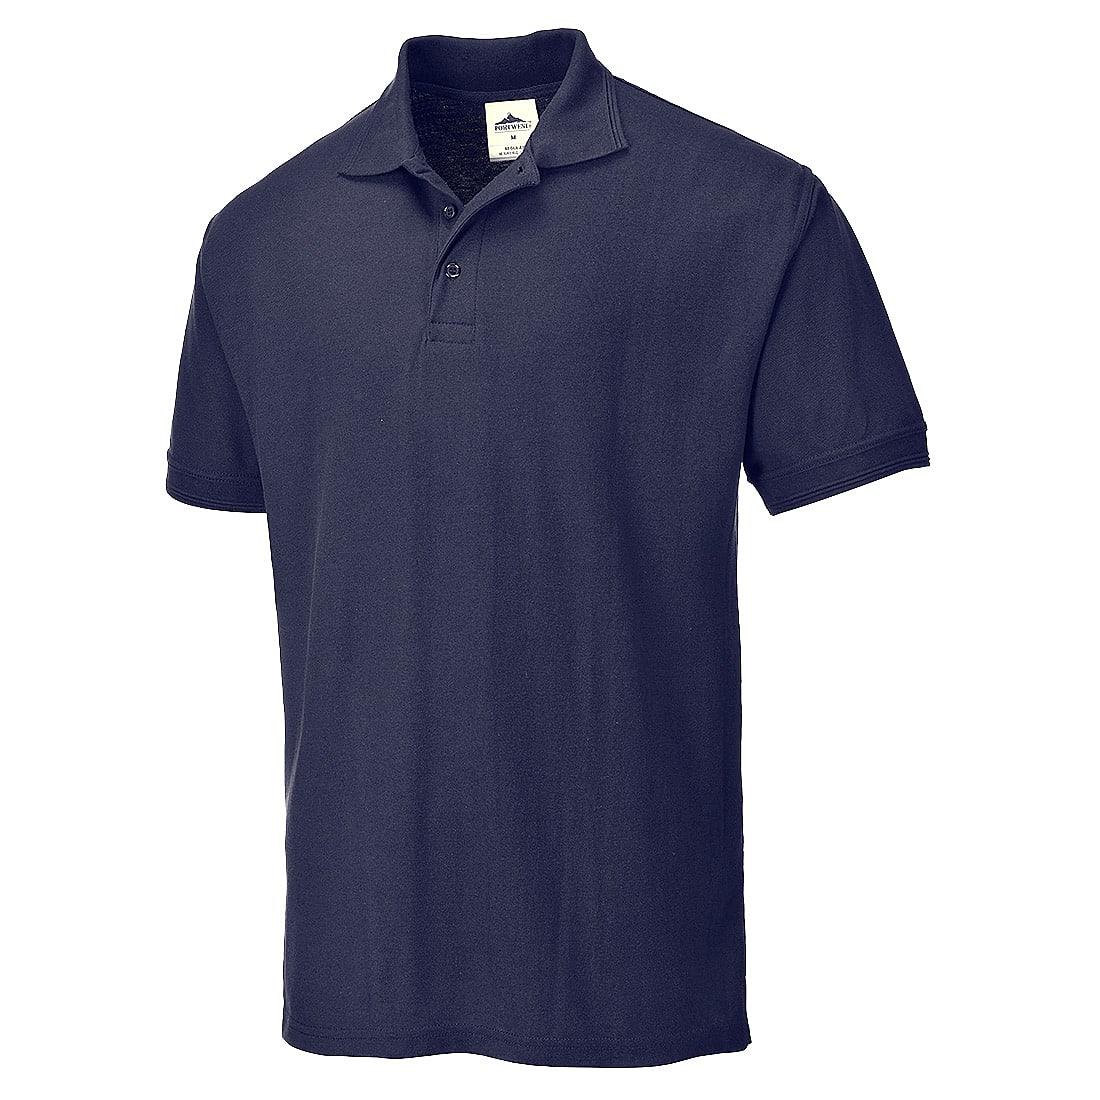 Portwest Verona Cotton Polo Shirt in Navy (Product Code: B220)